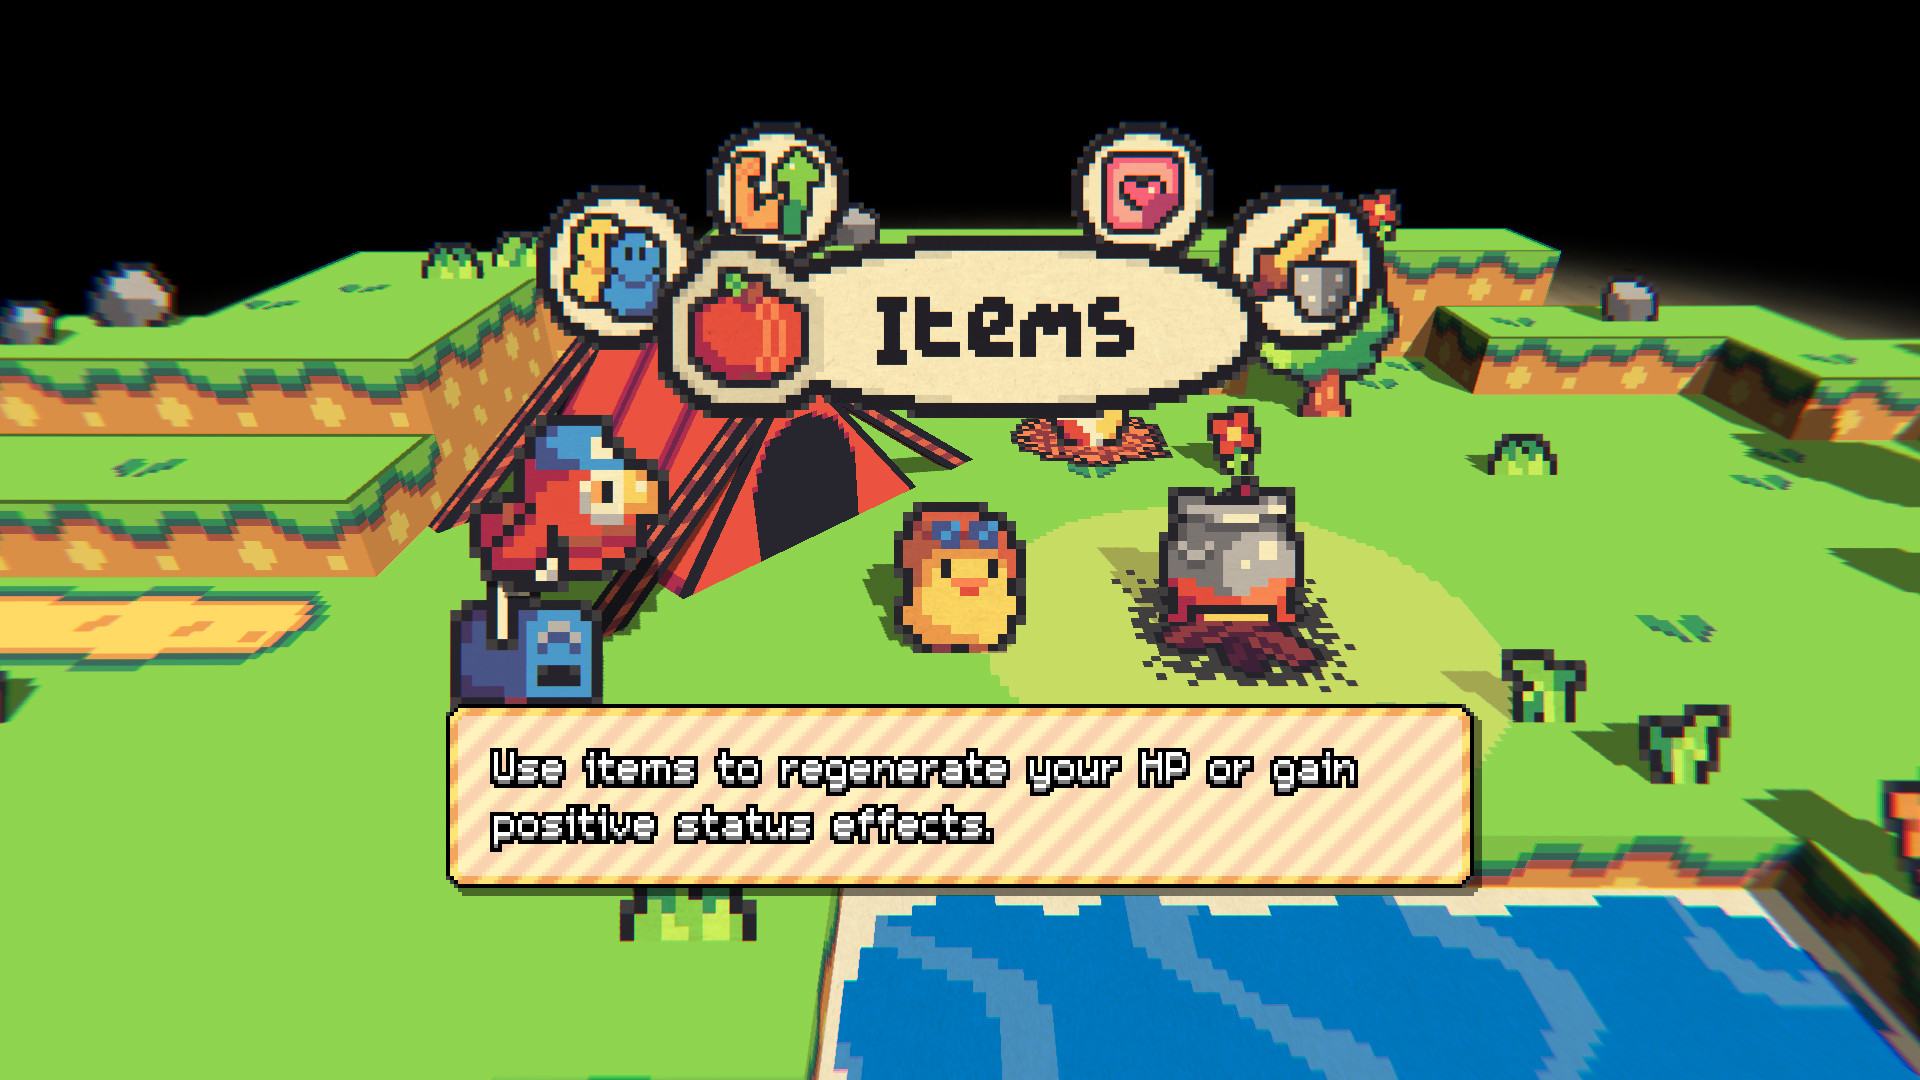 inventory/level up menu in between levels, with chick character pondering an items screen